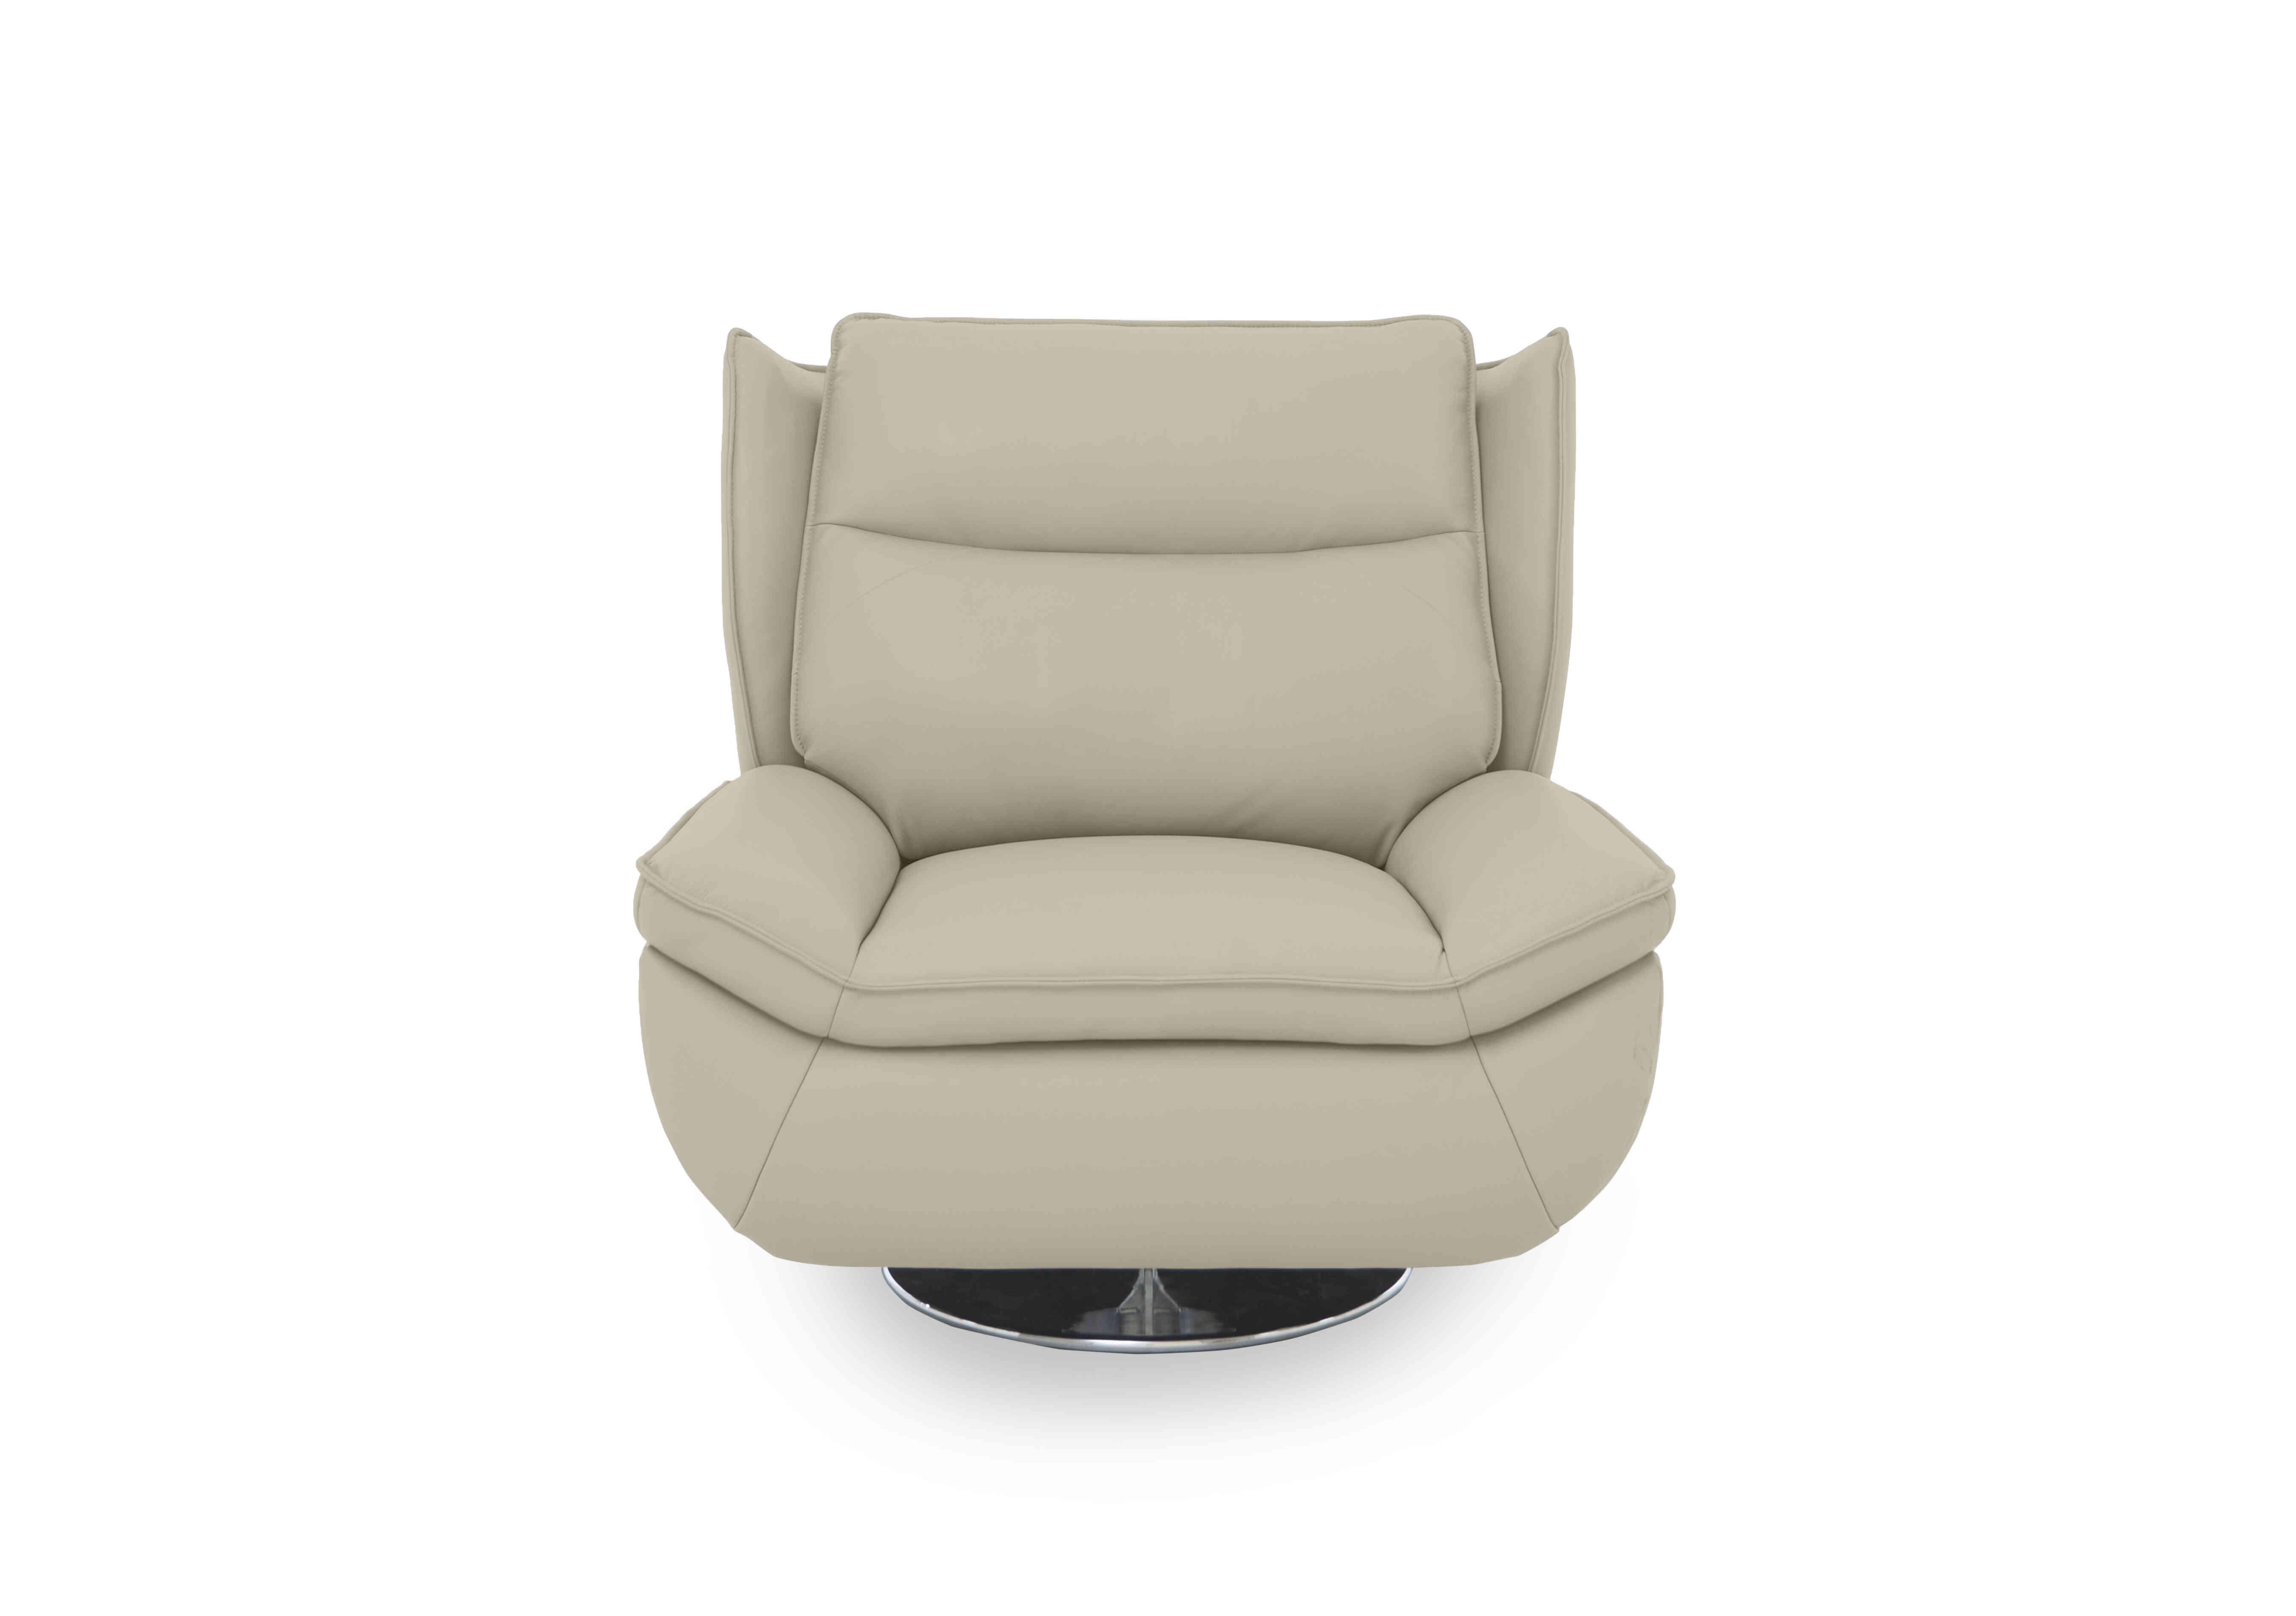 Vinny Leather Swivel Chair in Cat-60/05 Bone China on Furniture Village